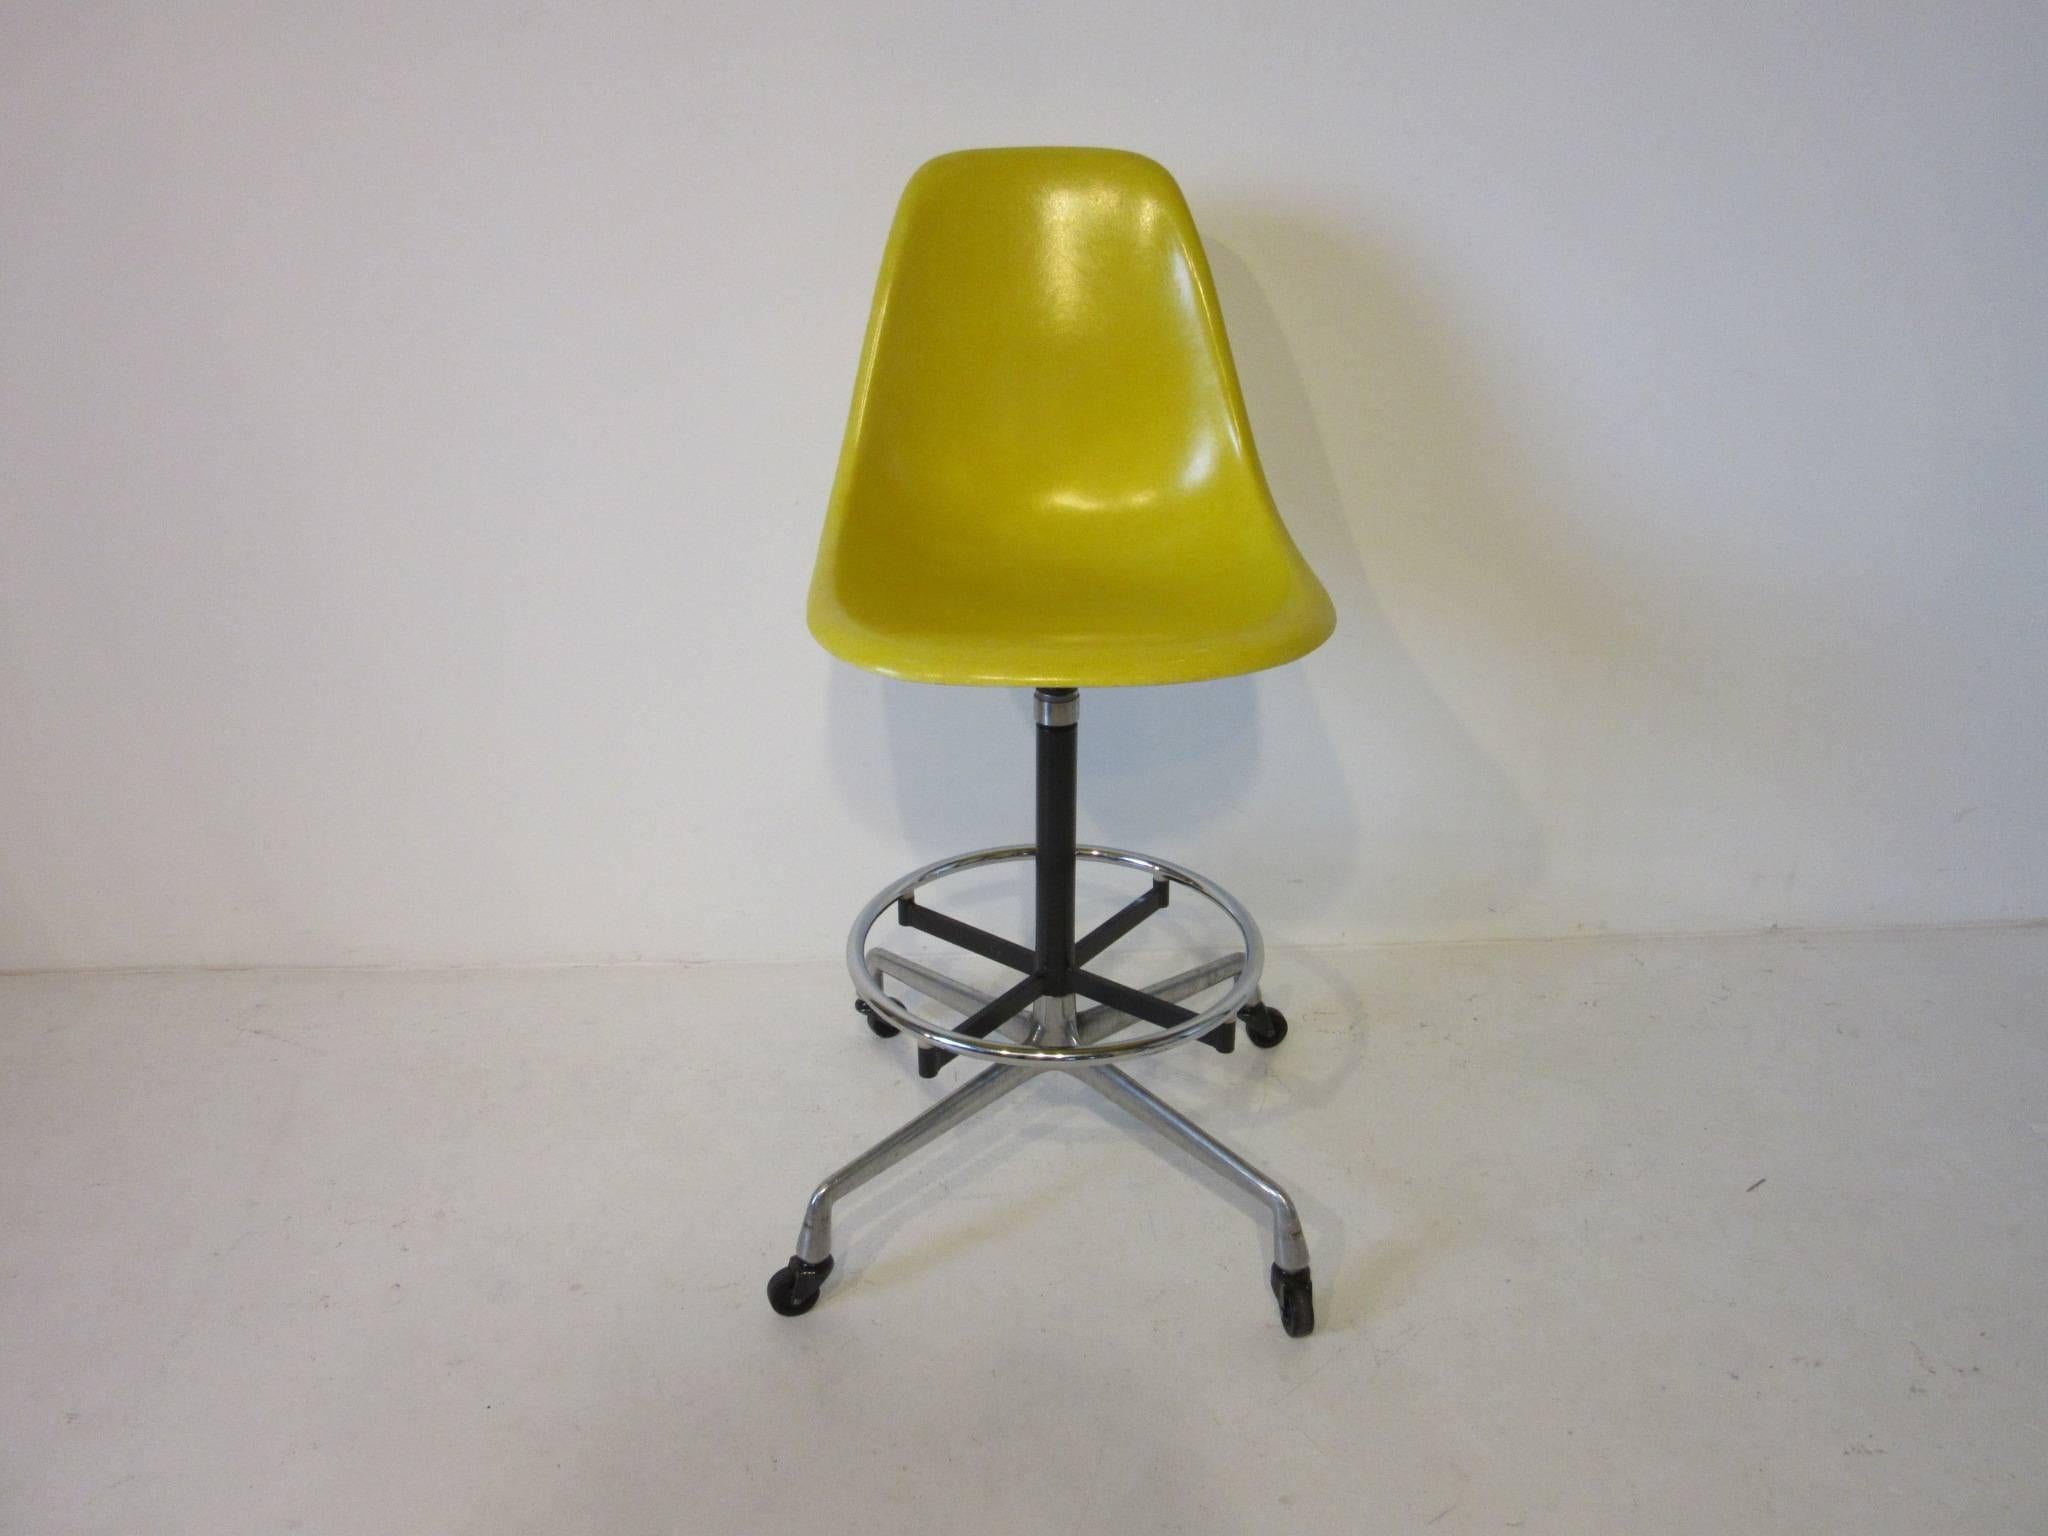 A pair of Eames aluminium group swiveling and height adjustable rolling architectural drafting or bar stools with bright yellow fiberglass shell seats. Dark grey metal support frame with chromed footrest and cast aluminium base with black wheels